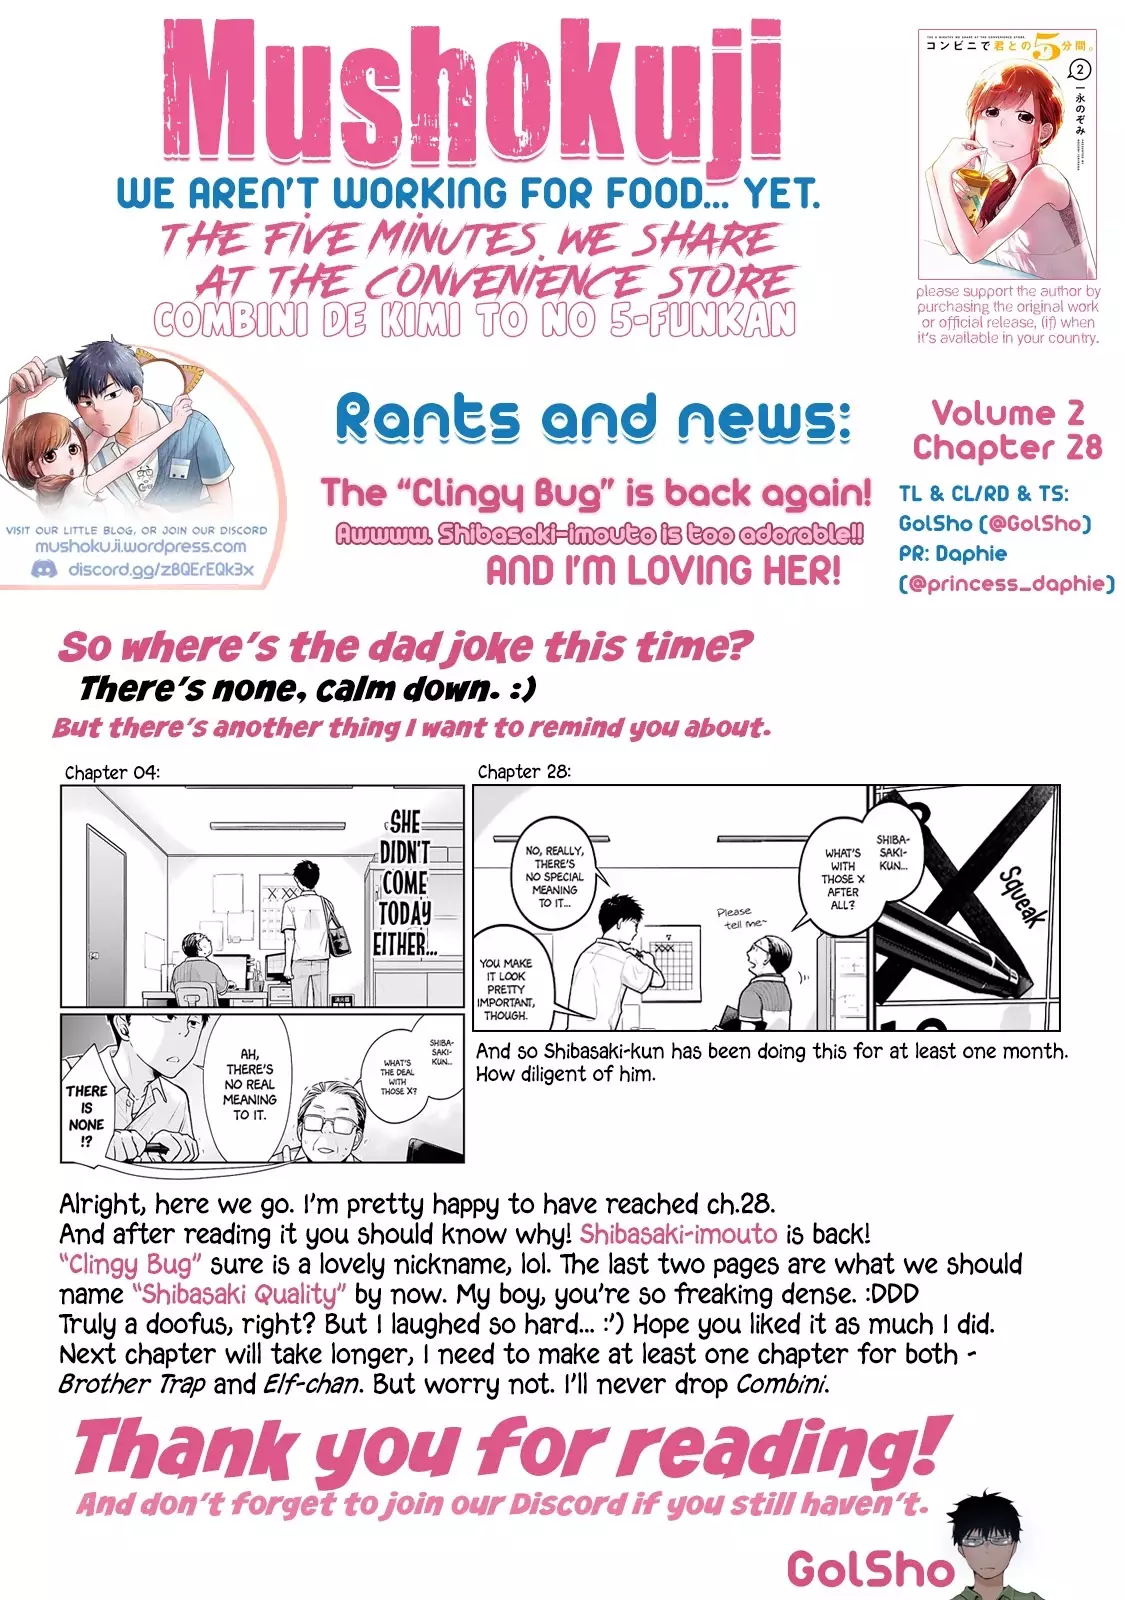 5 Minutes With You At A Convenience Store - 28 page 11